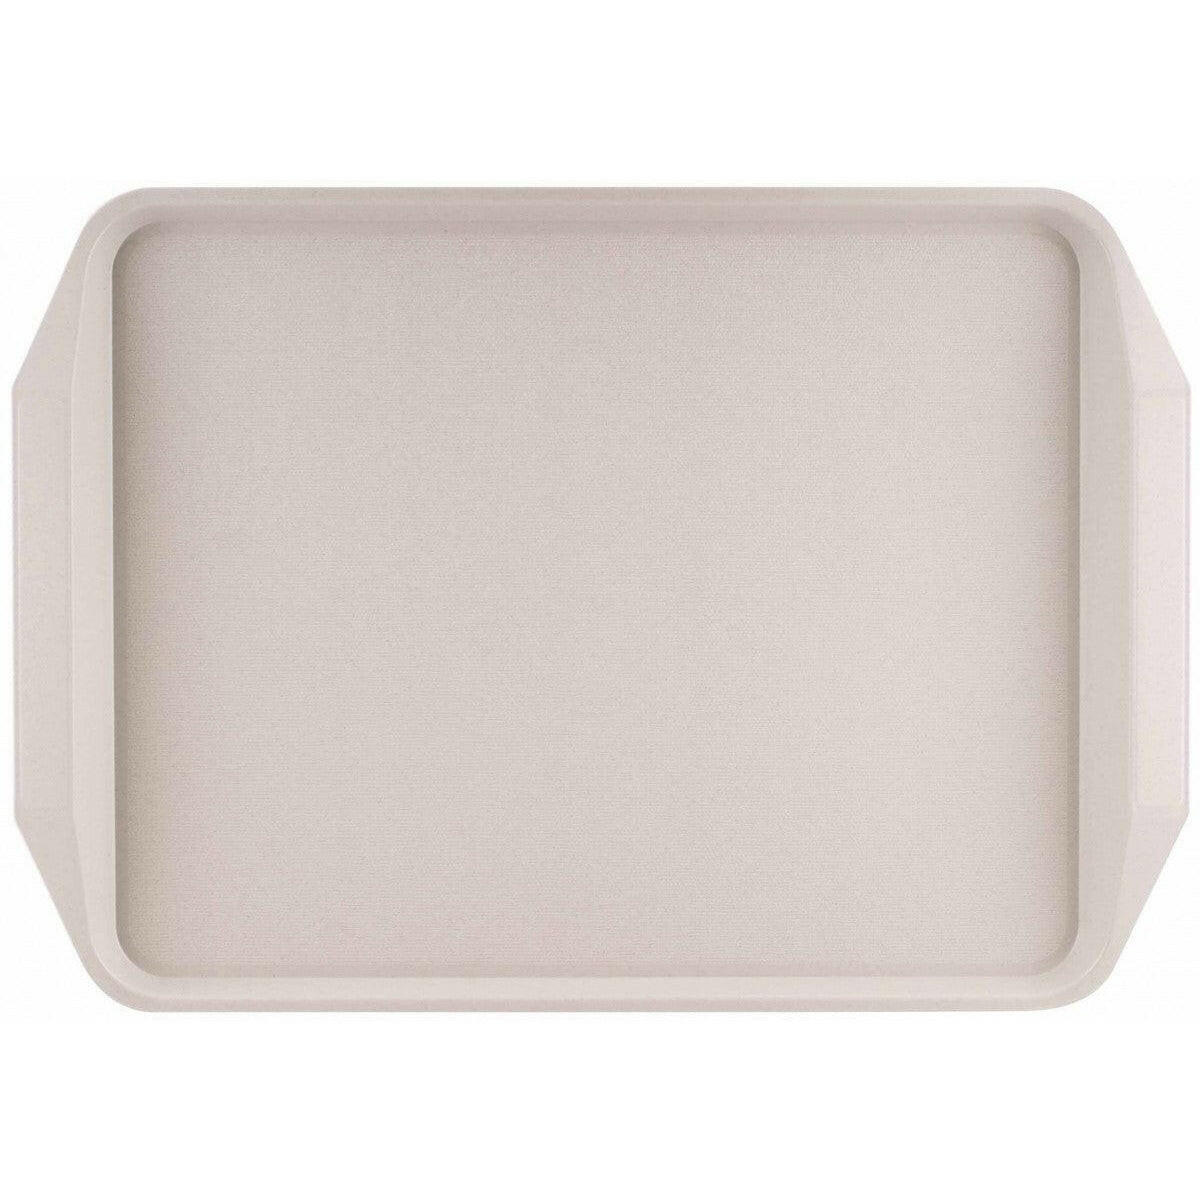 ABS Service Tray 43cm x 33cm - Cater-Connect Ltd